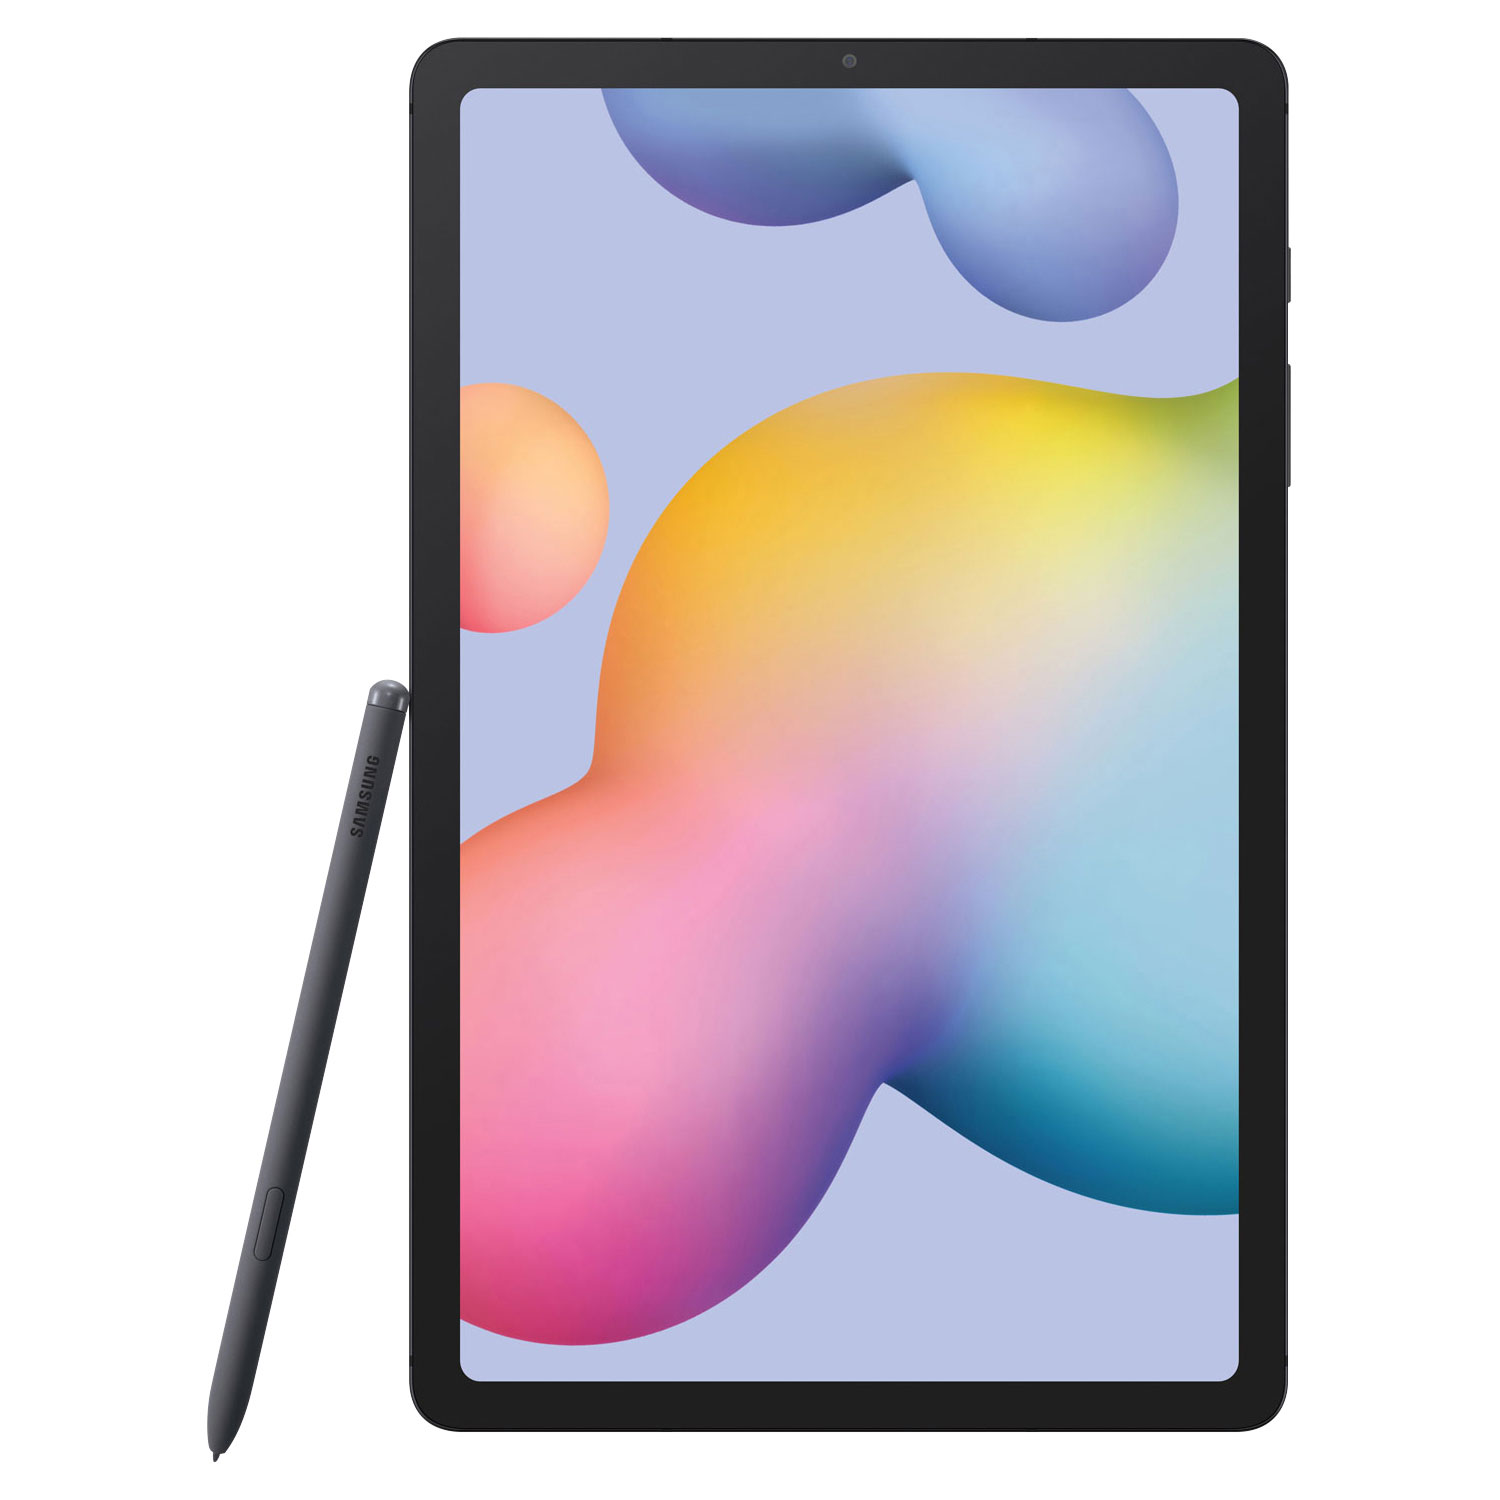 Samsung Galaxy Tab S6 Lite 10.4" 128GB Android 12 Tablet with Snapdragon 720G 8-Core Processor - Grey